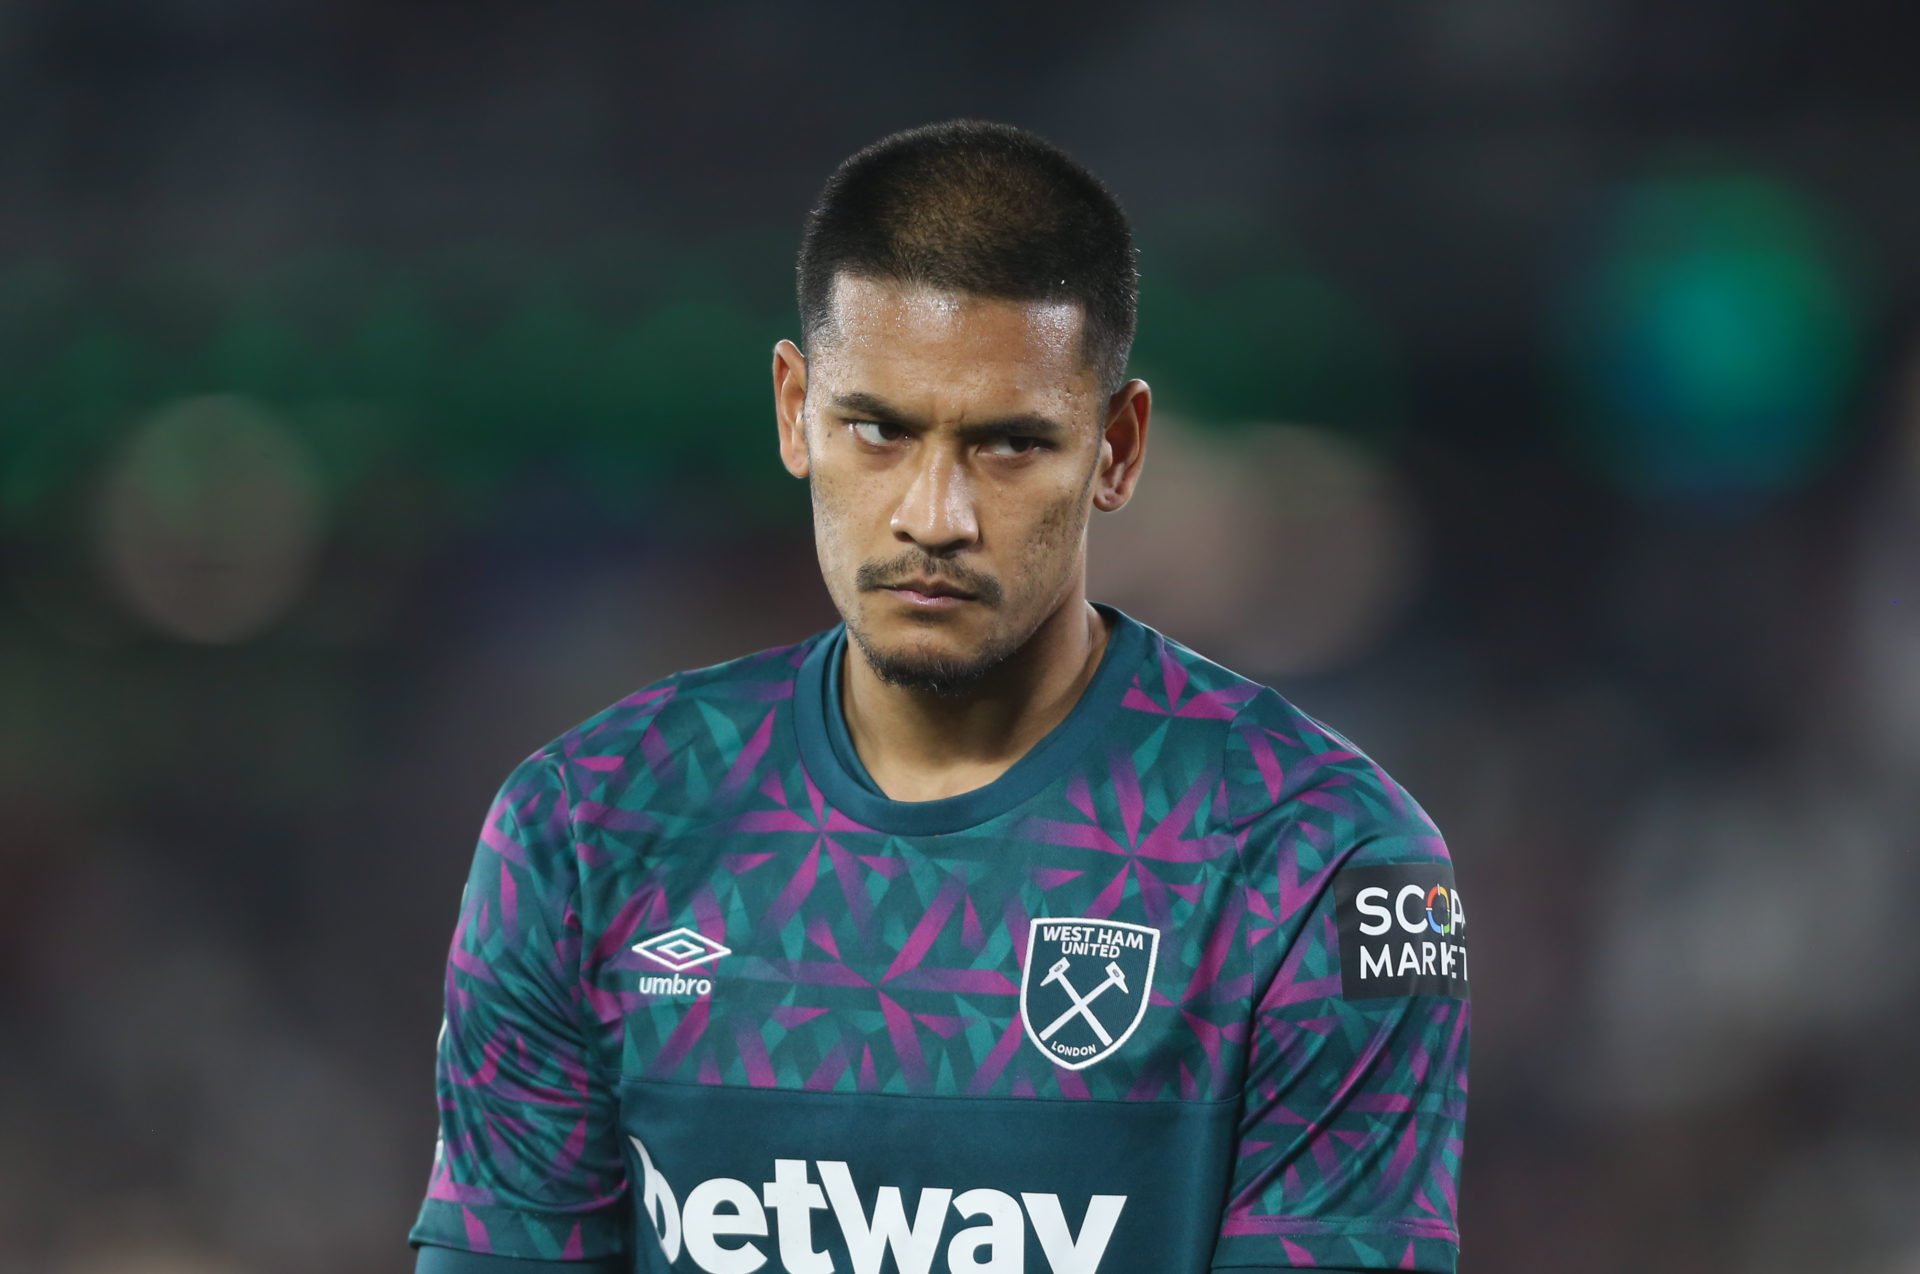 West Ham coach suggests Moyes has big dilemma with Areola after rumour